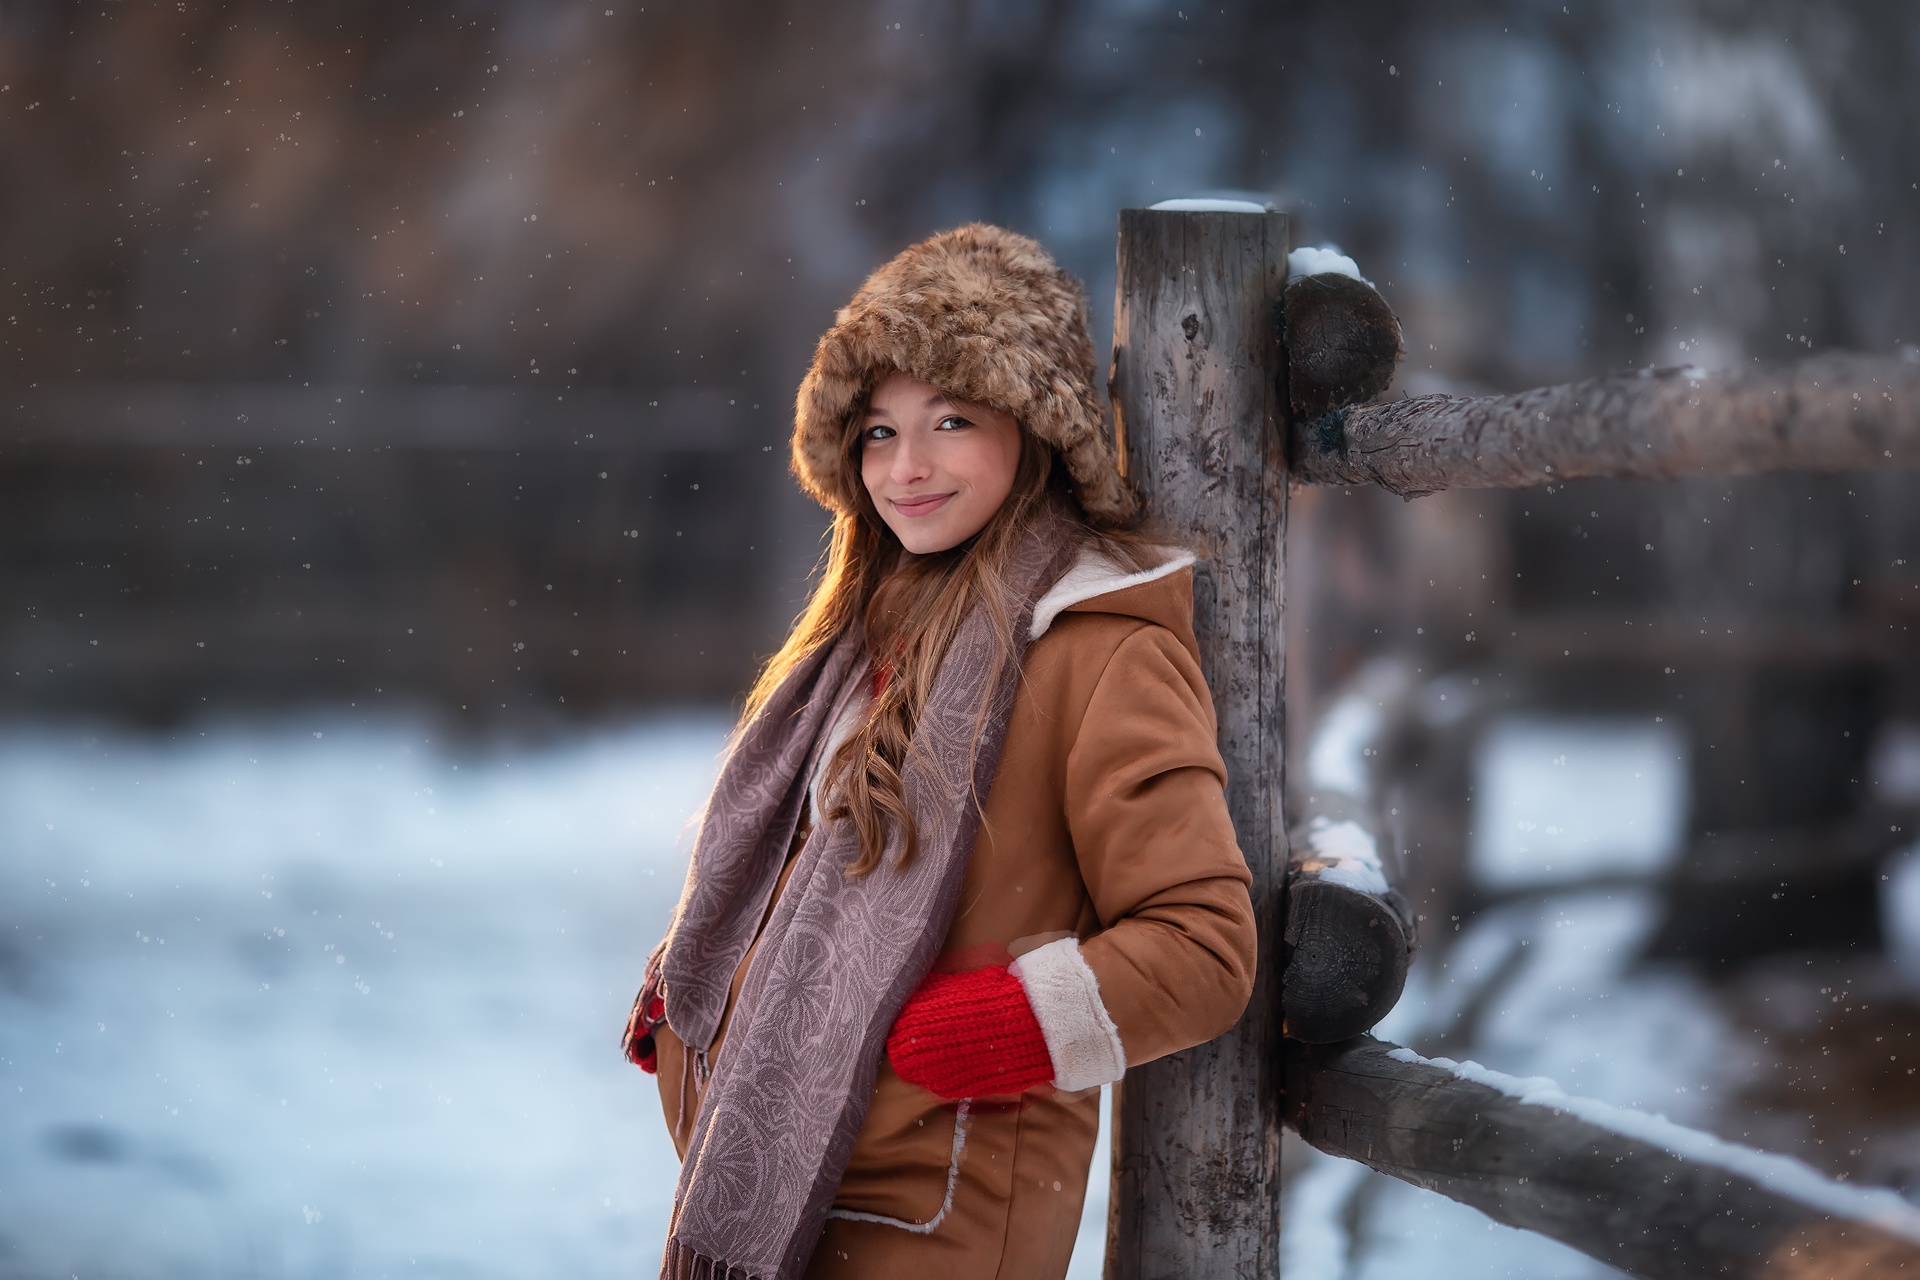 Women Model Women Outdoors Winter Cold Outdoors Smiling Looking At Viewer Fur Hat Fur Cap Snow Fence 1920x1280